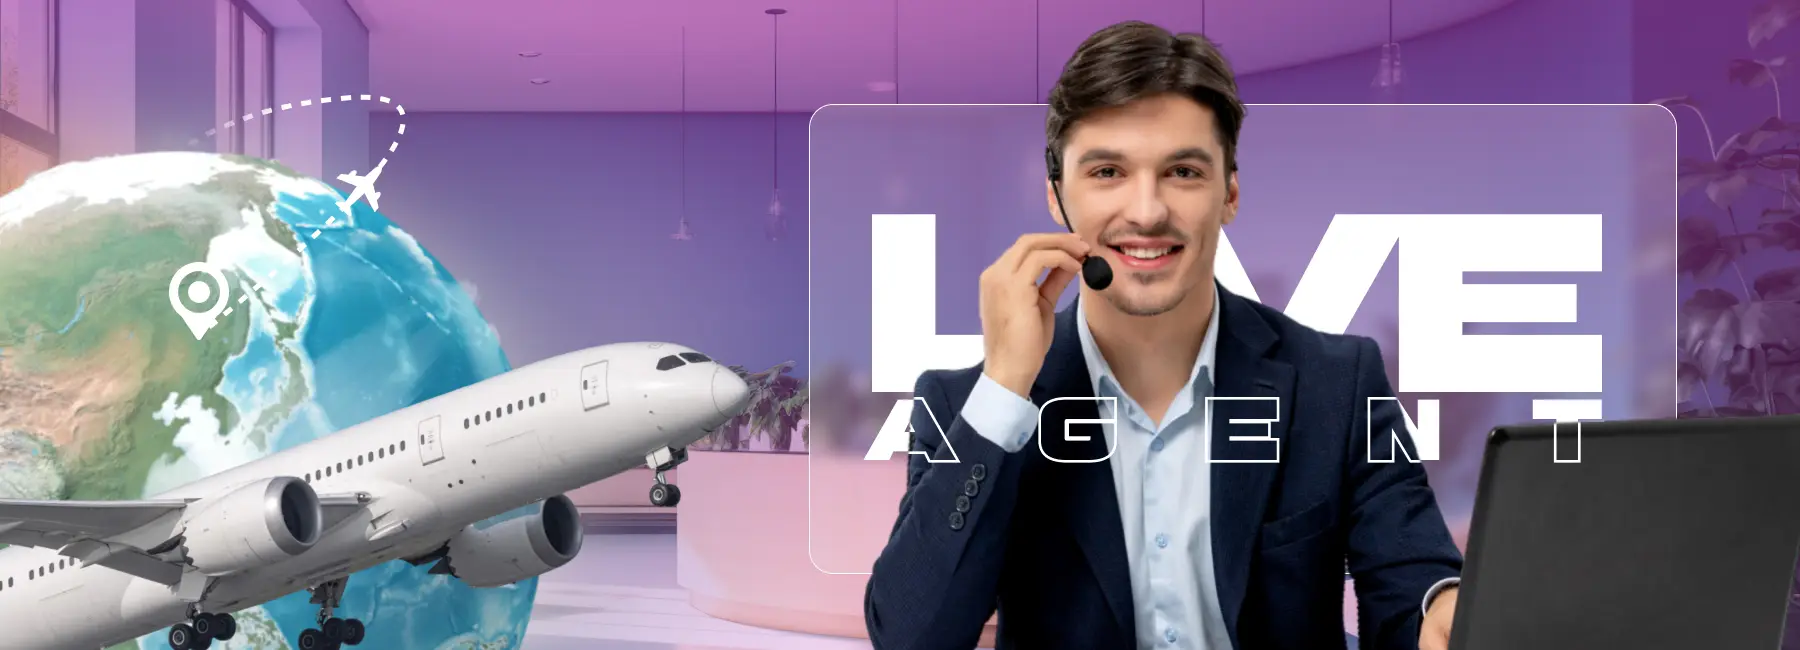 How To Speak To A Live Person At Volaris Airlines